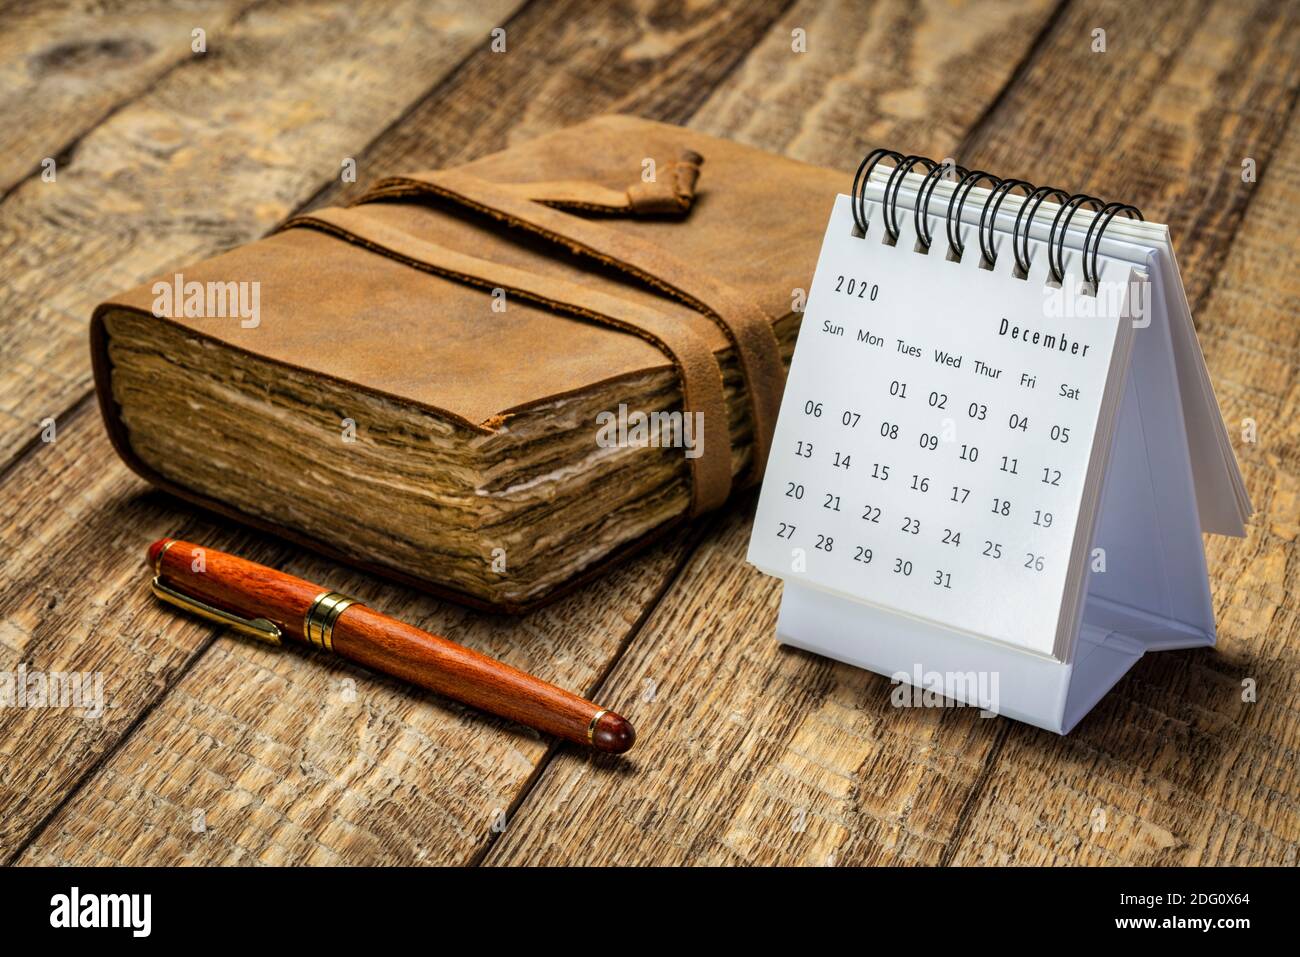 December 2020 - spiral desktop calendar against rustic wood with an antique leather-bound journal and a stylish pen, season,  time and business concep Stock Photo